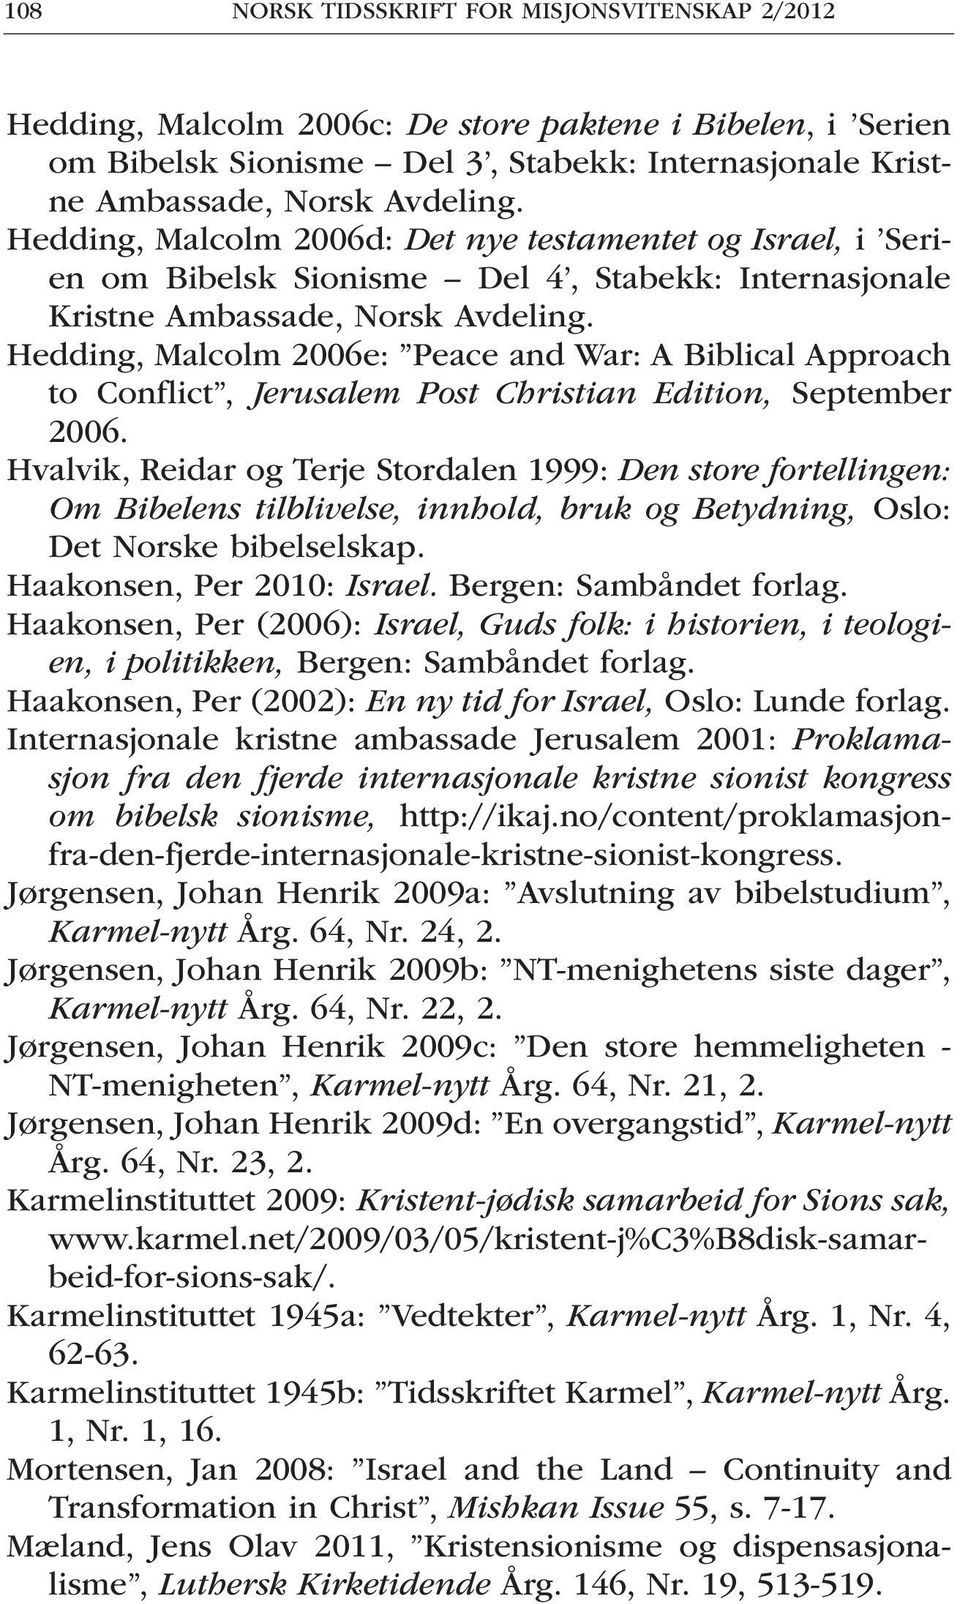 Hedding, Malcolm 2006e: Peace and War: A Biblical Approach to Conflict, Jerusalem Post Christian Edition, September 2006.